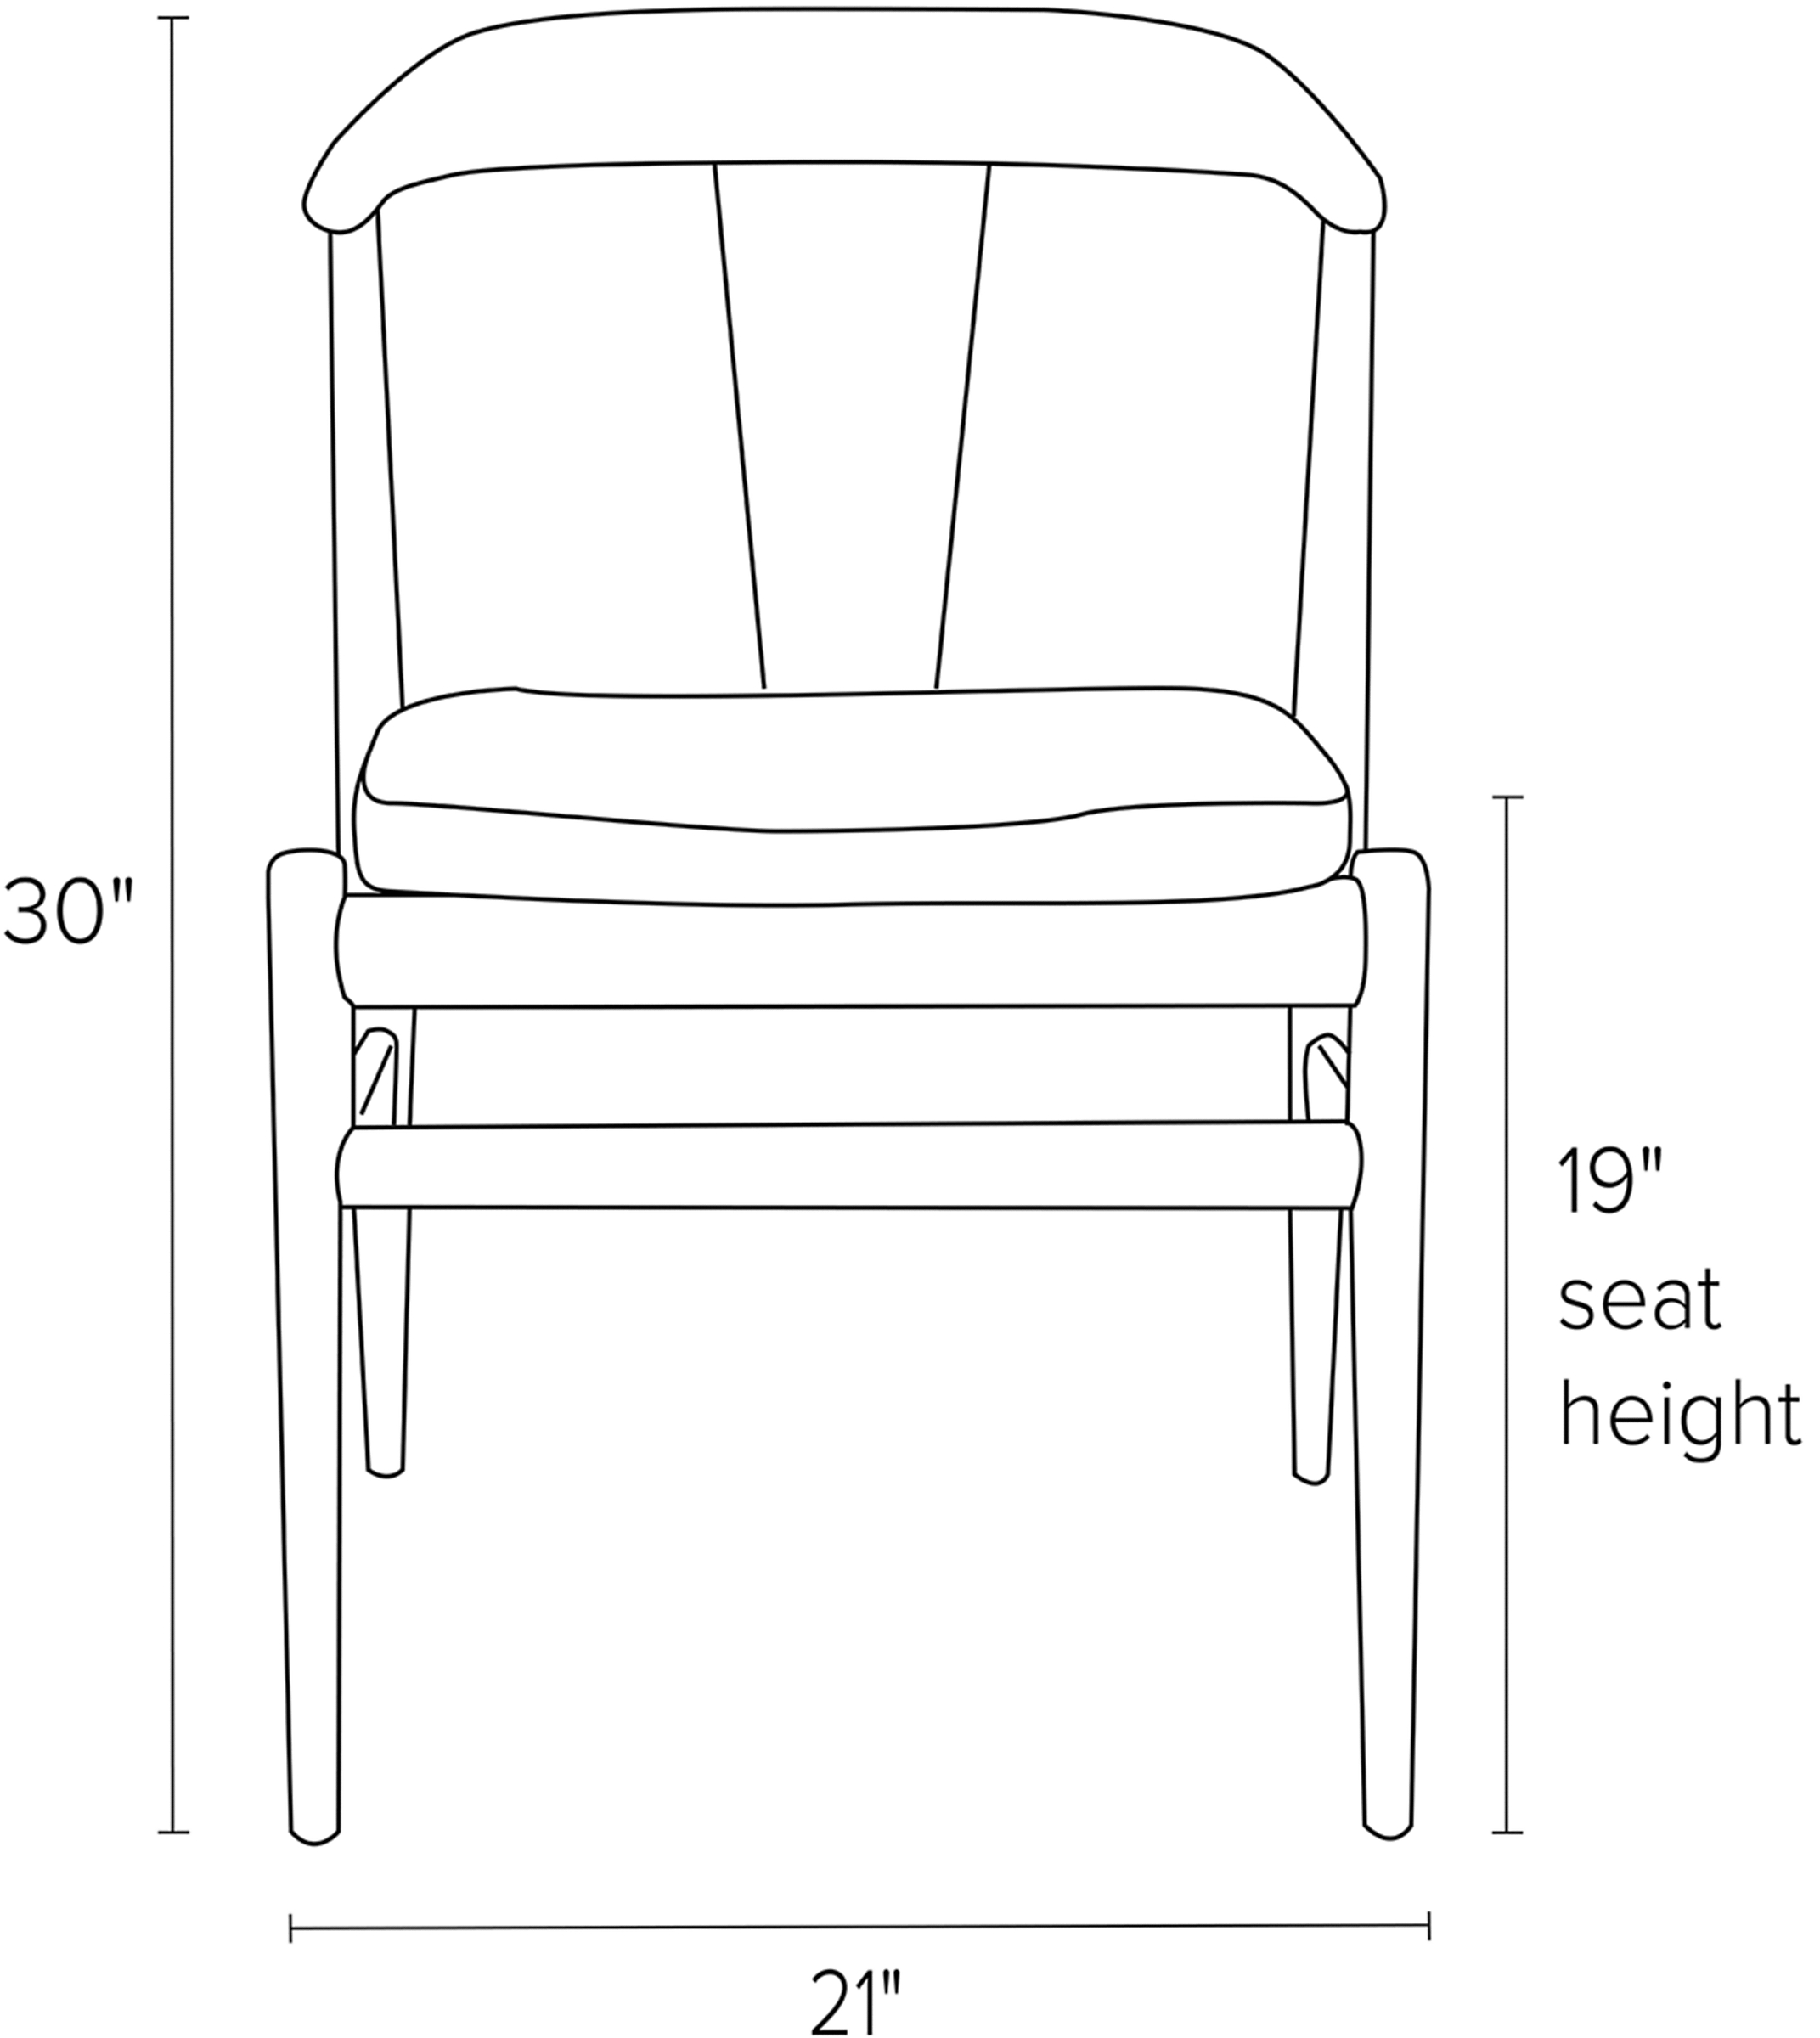 Front view dimension illustration of Evan side chair.